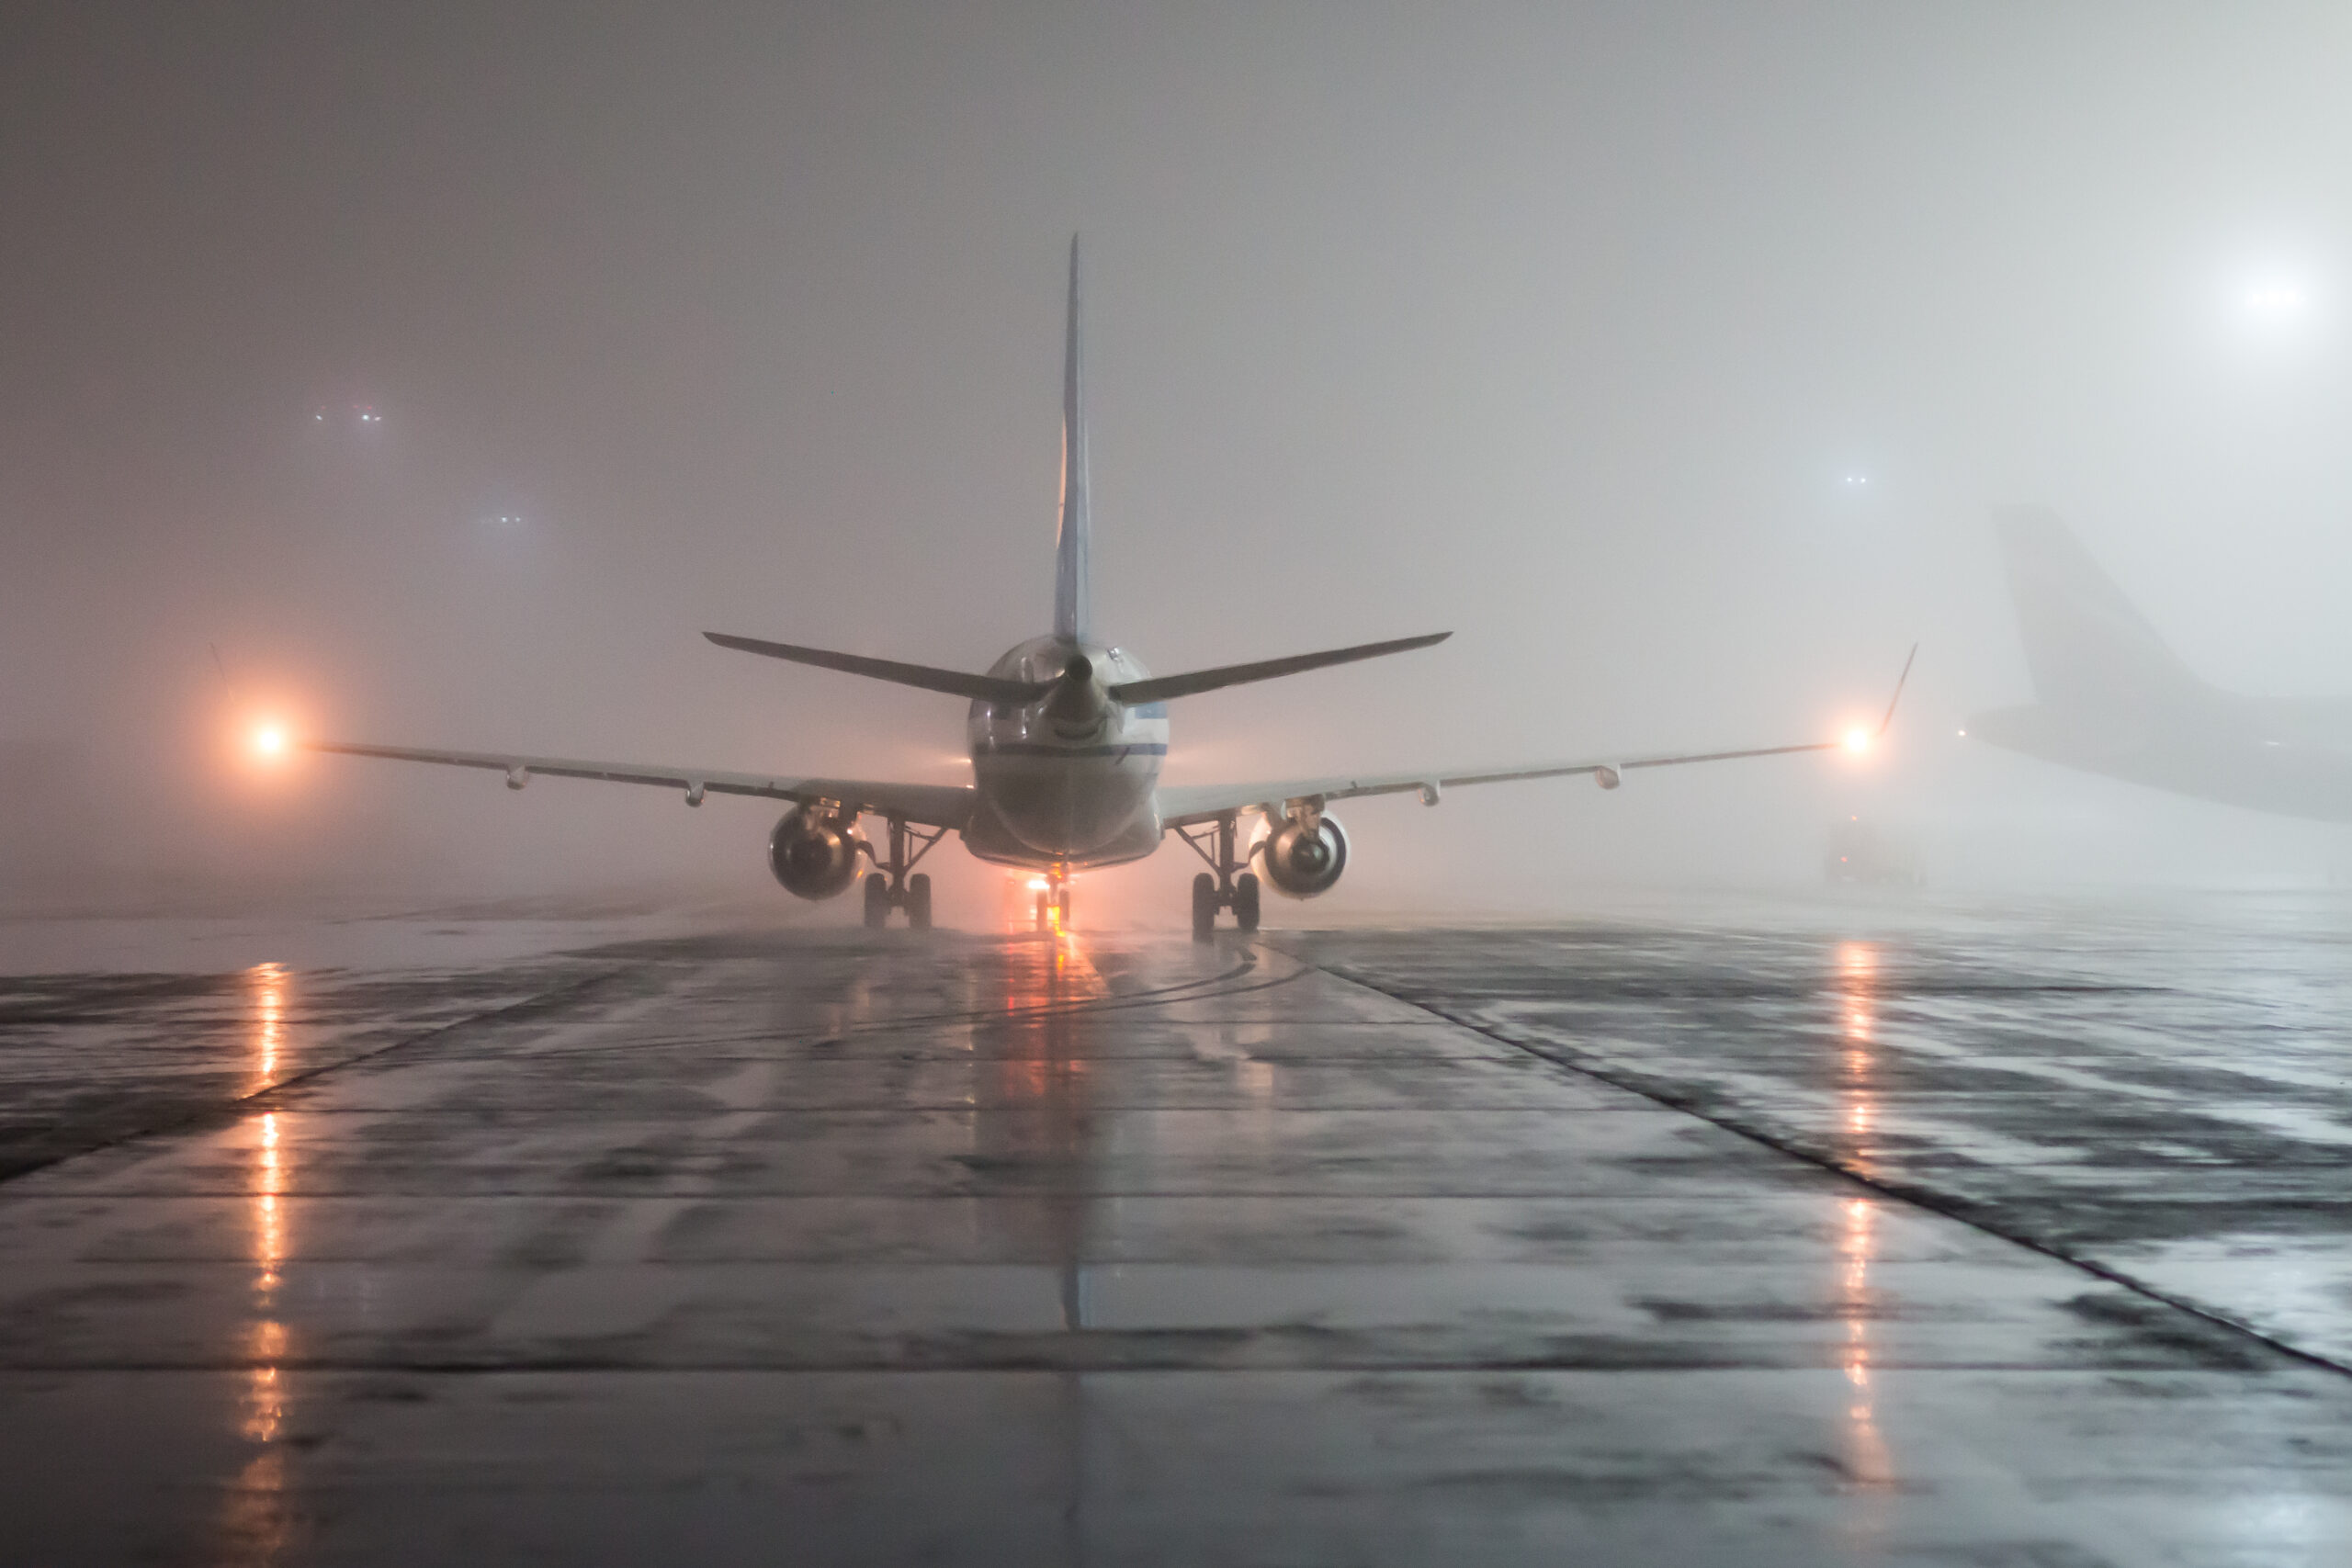 runway foggy night, view of the plane from the tail